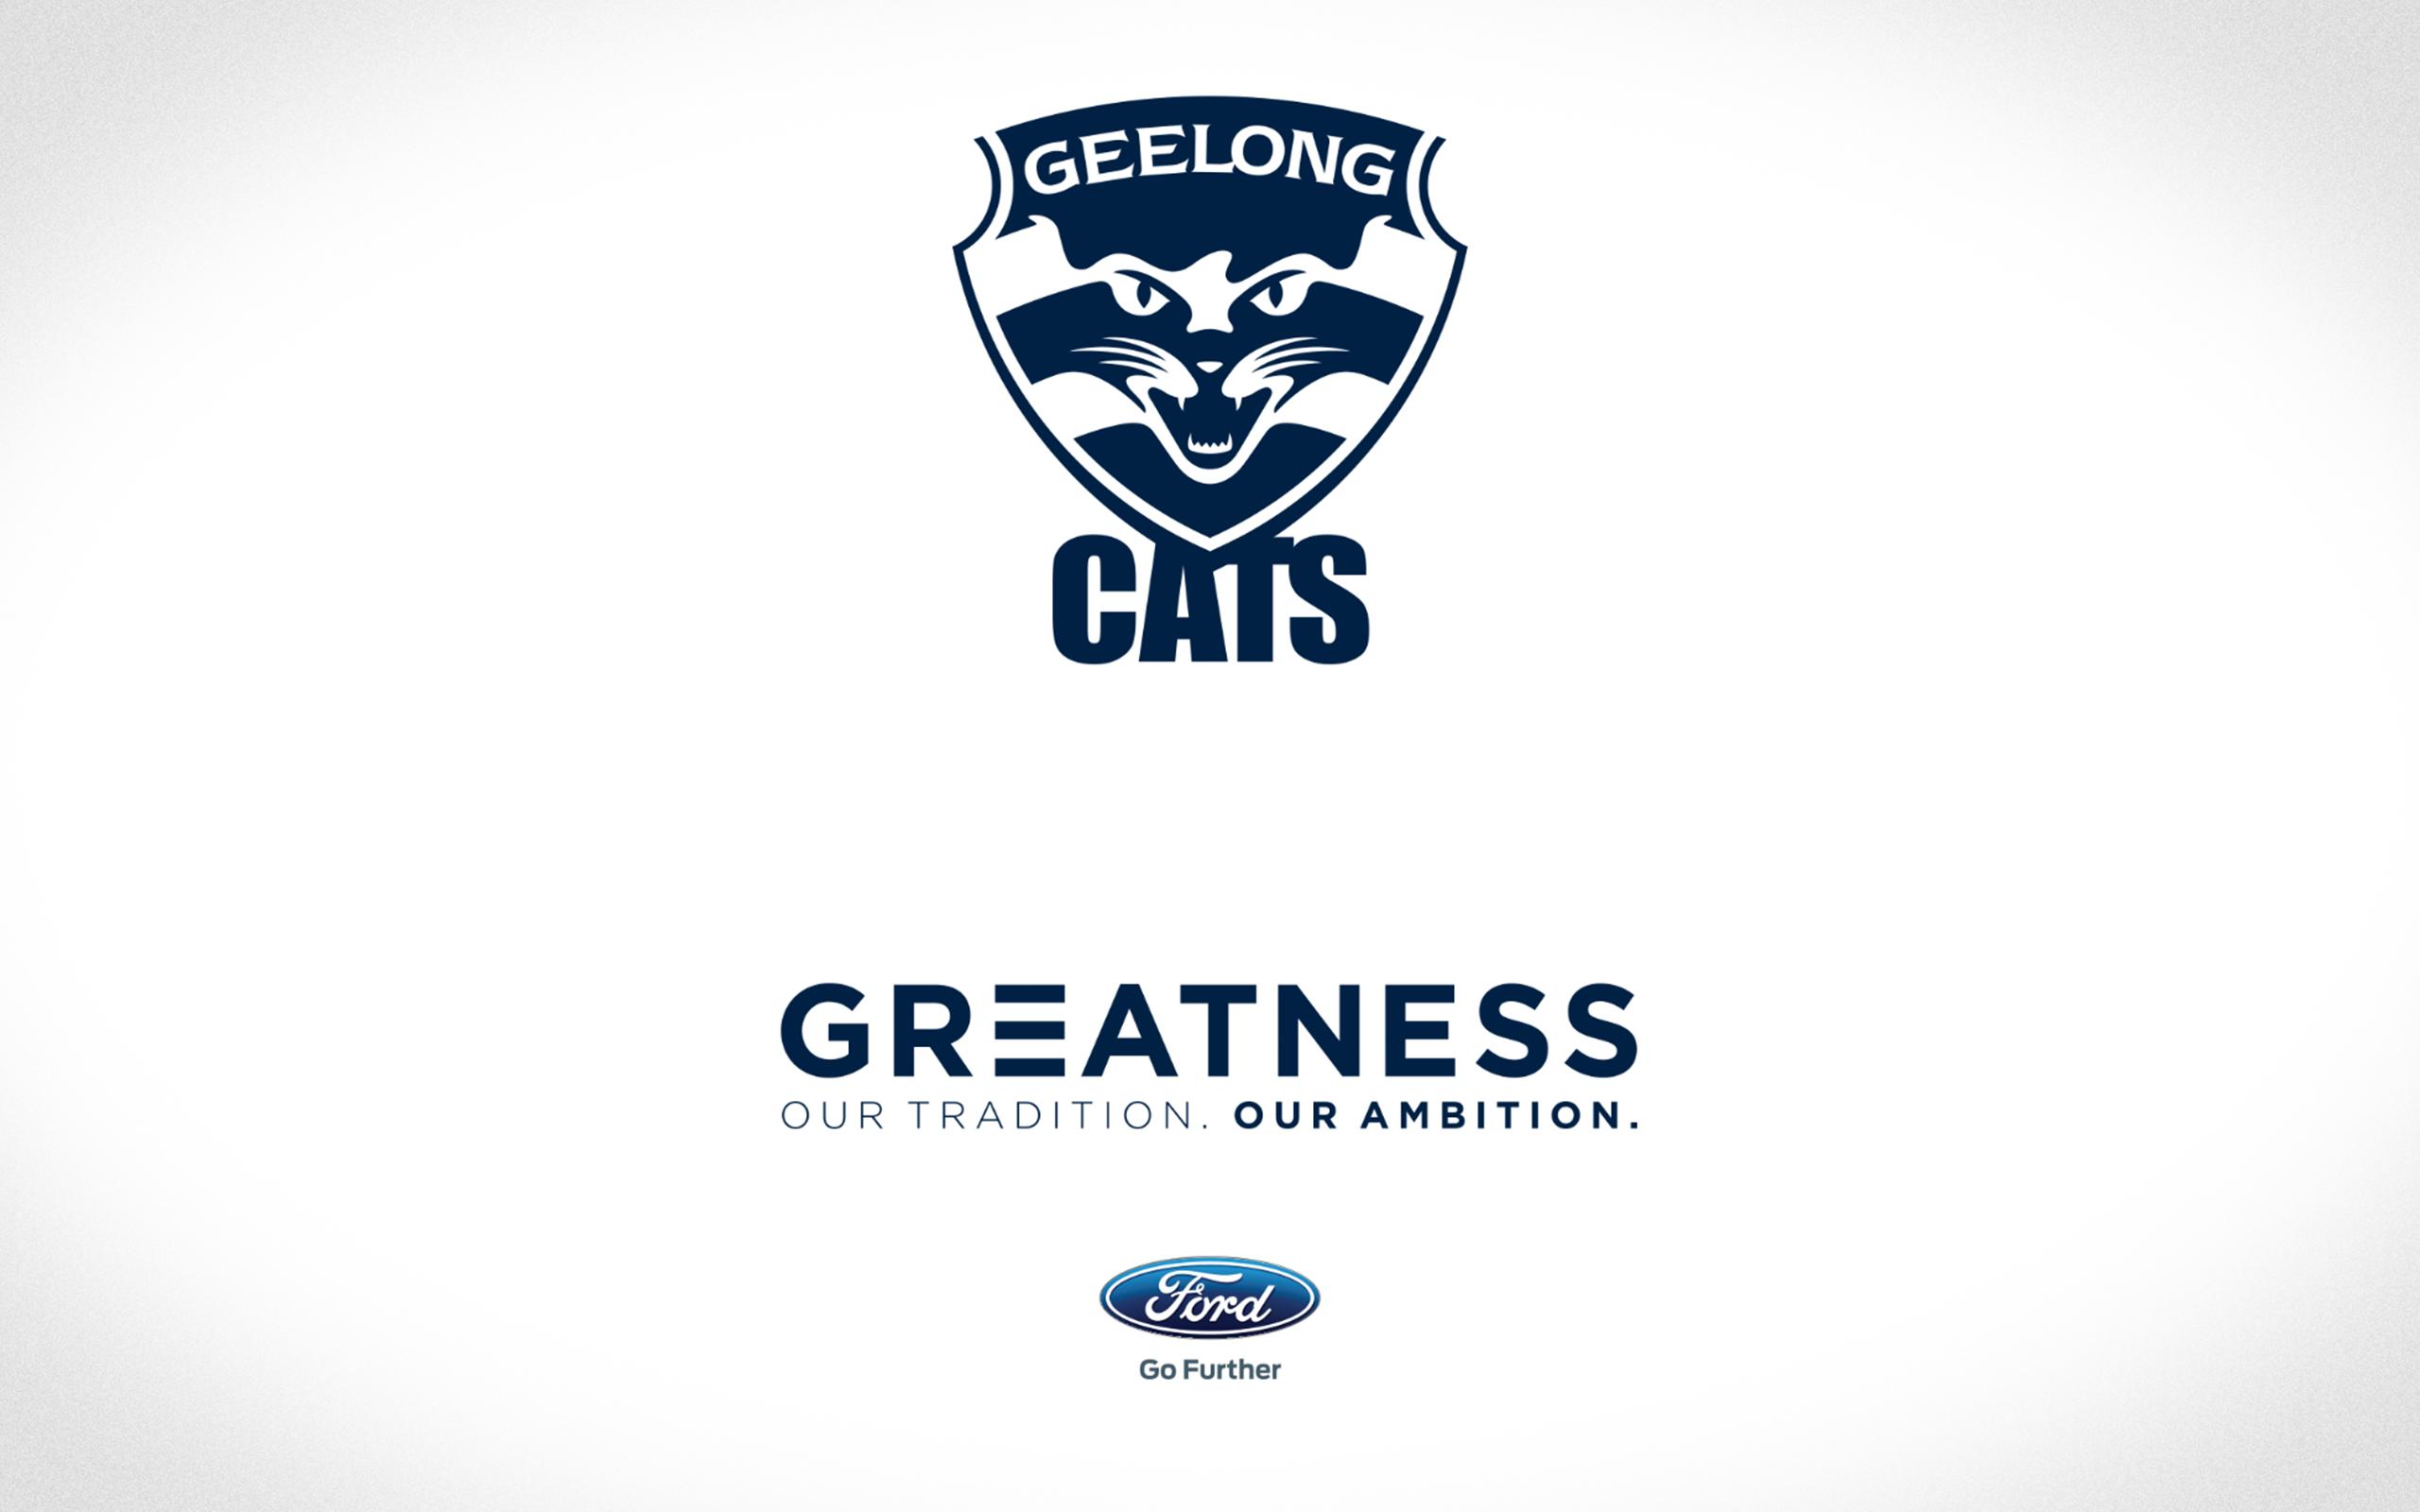 Geelong Cats for Android